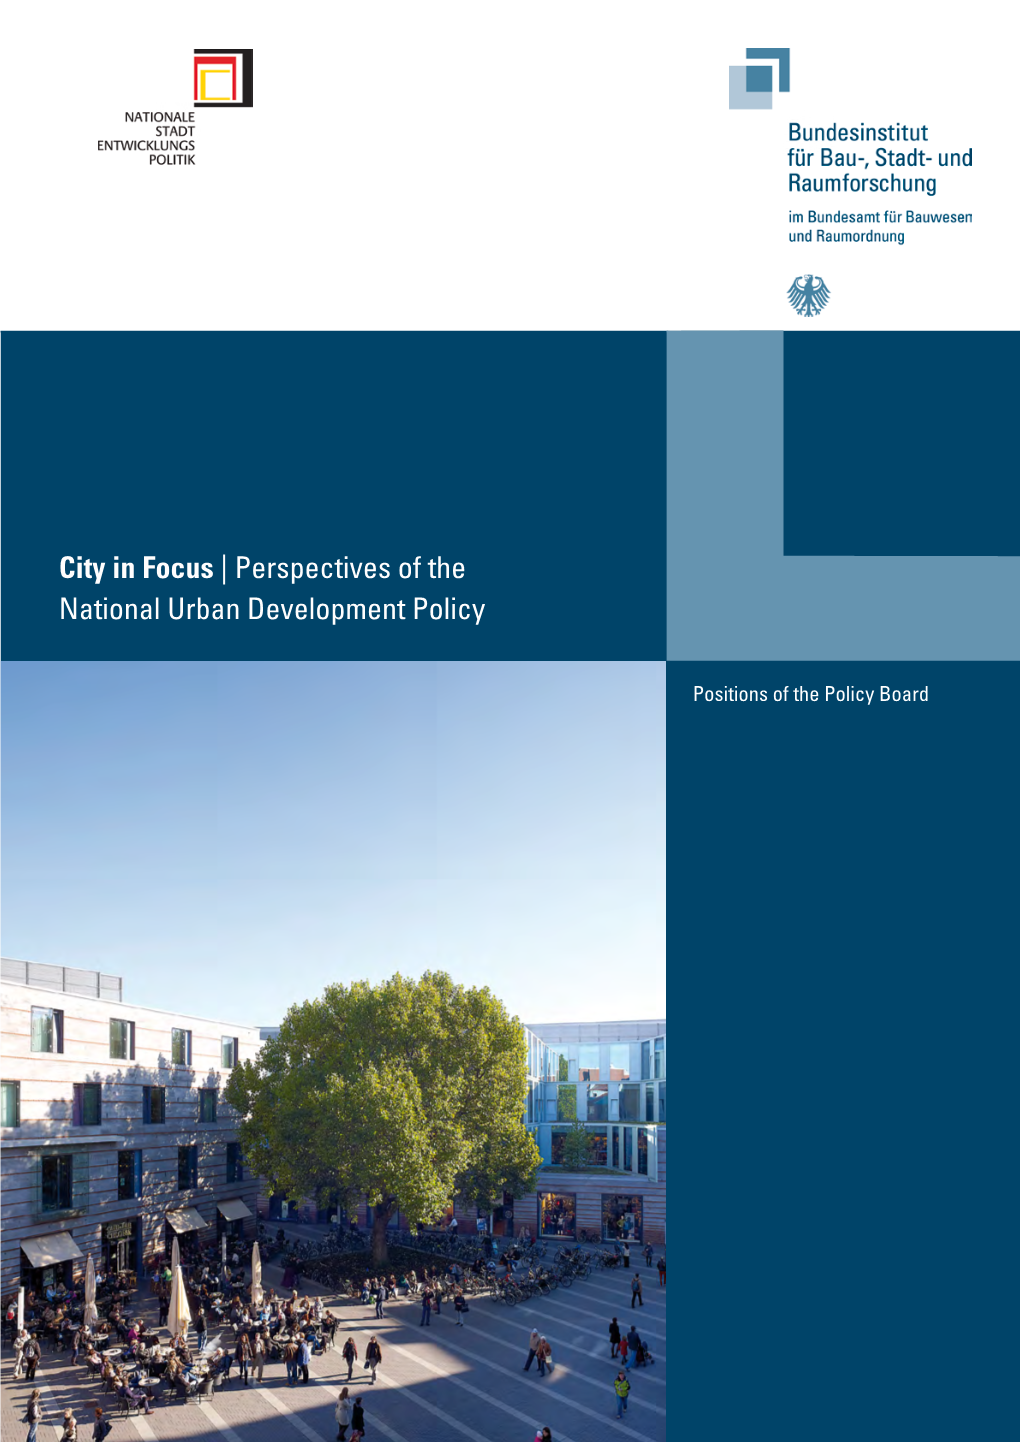 City in Focus: Perspectives of the National Urban Development Policy